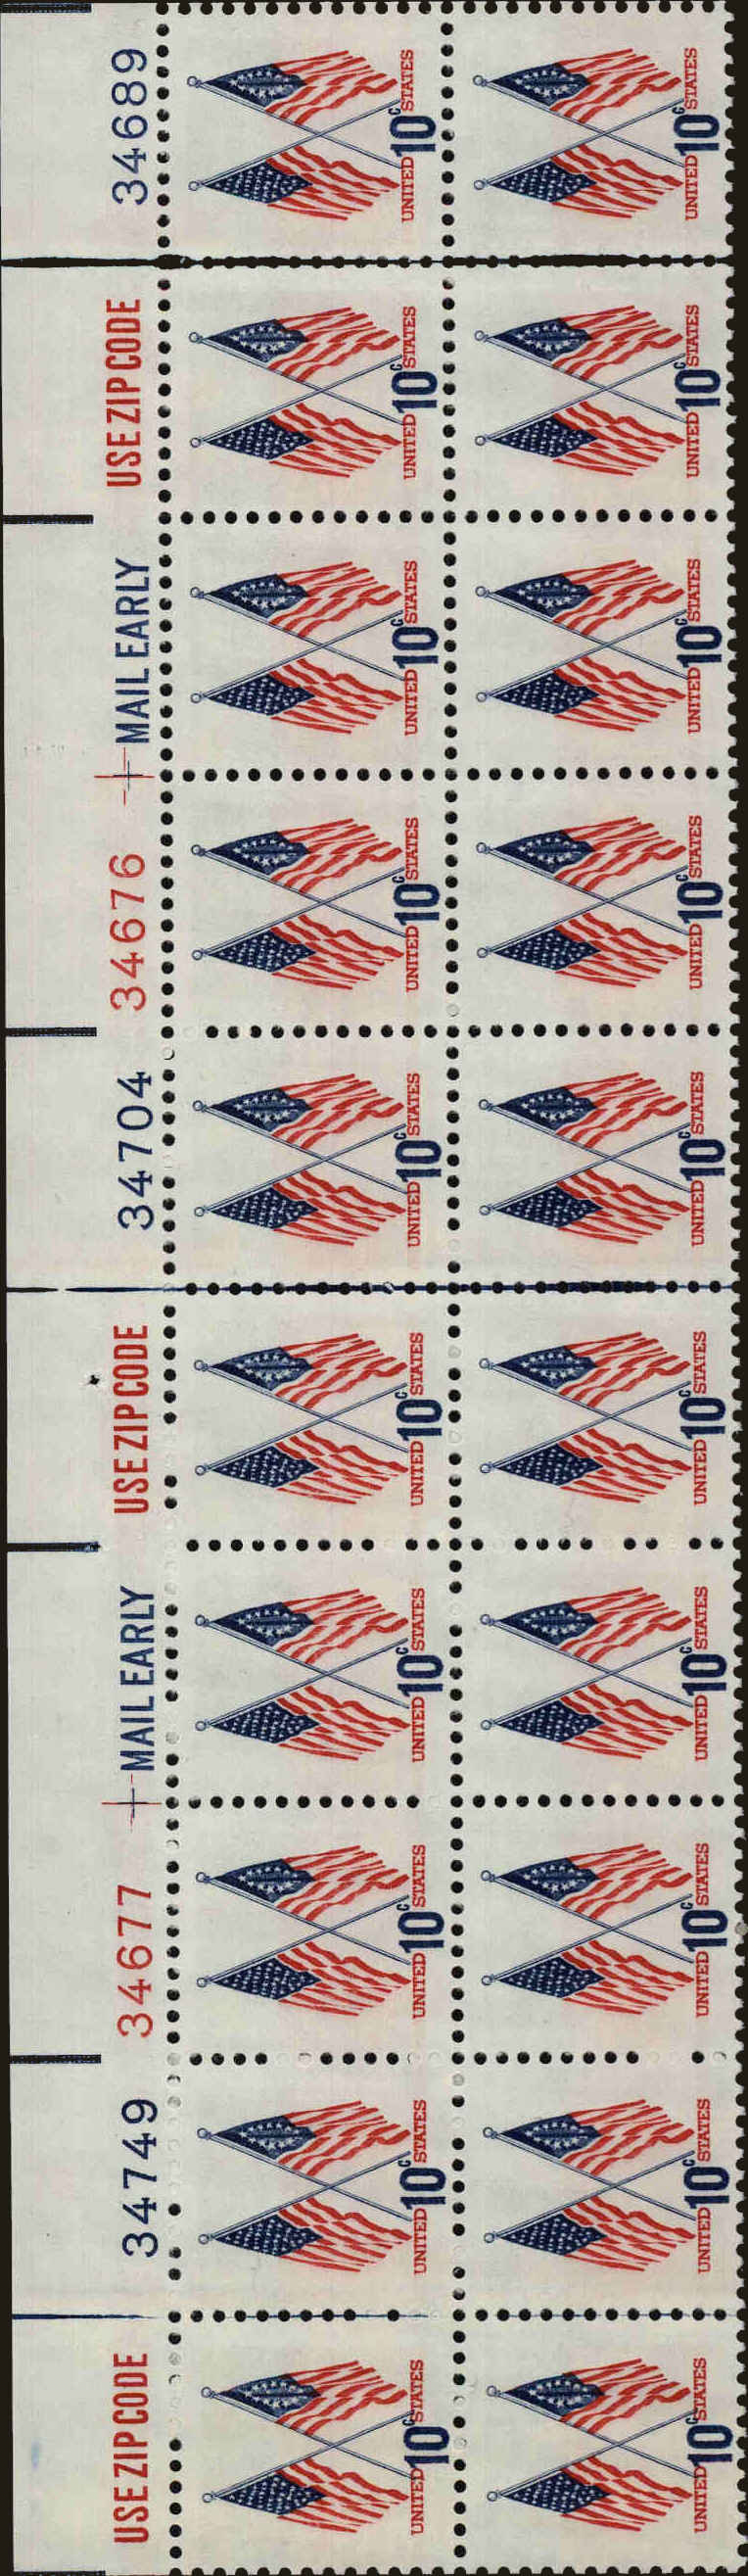 Front view of United States 1509 collectors stamp